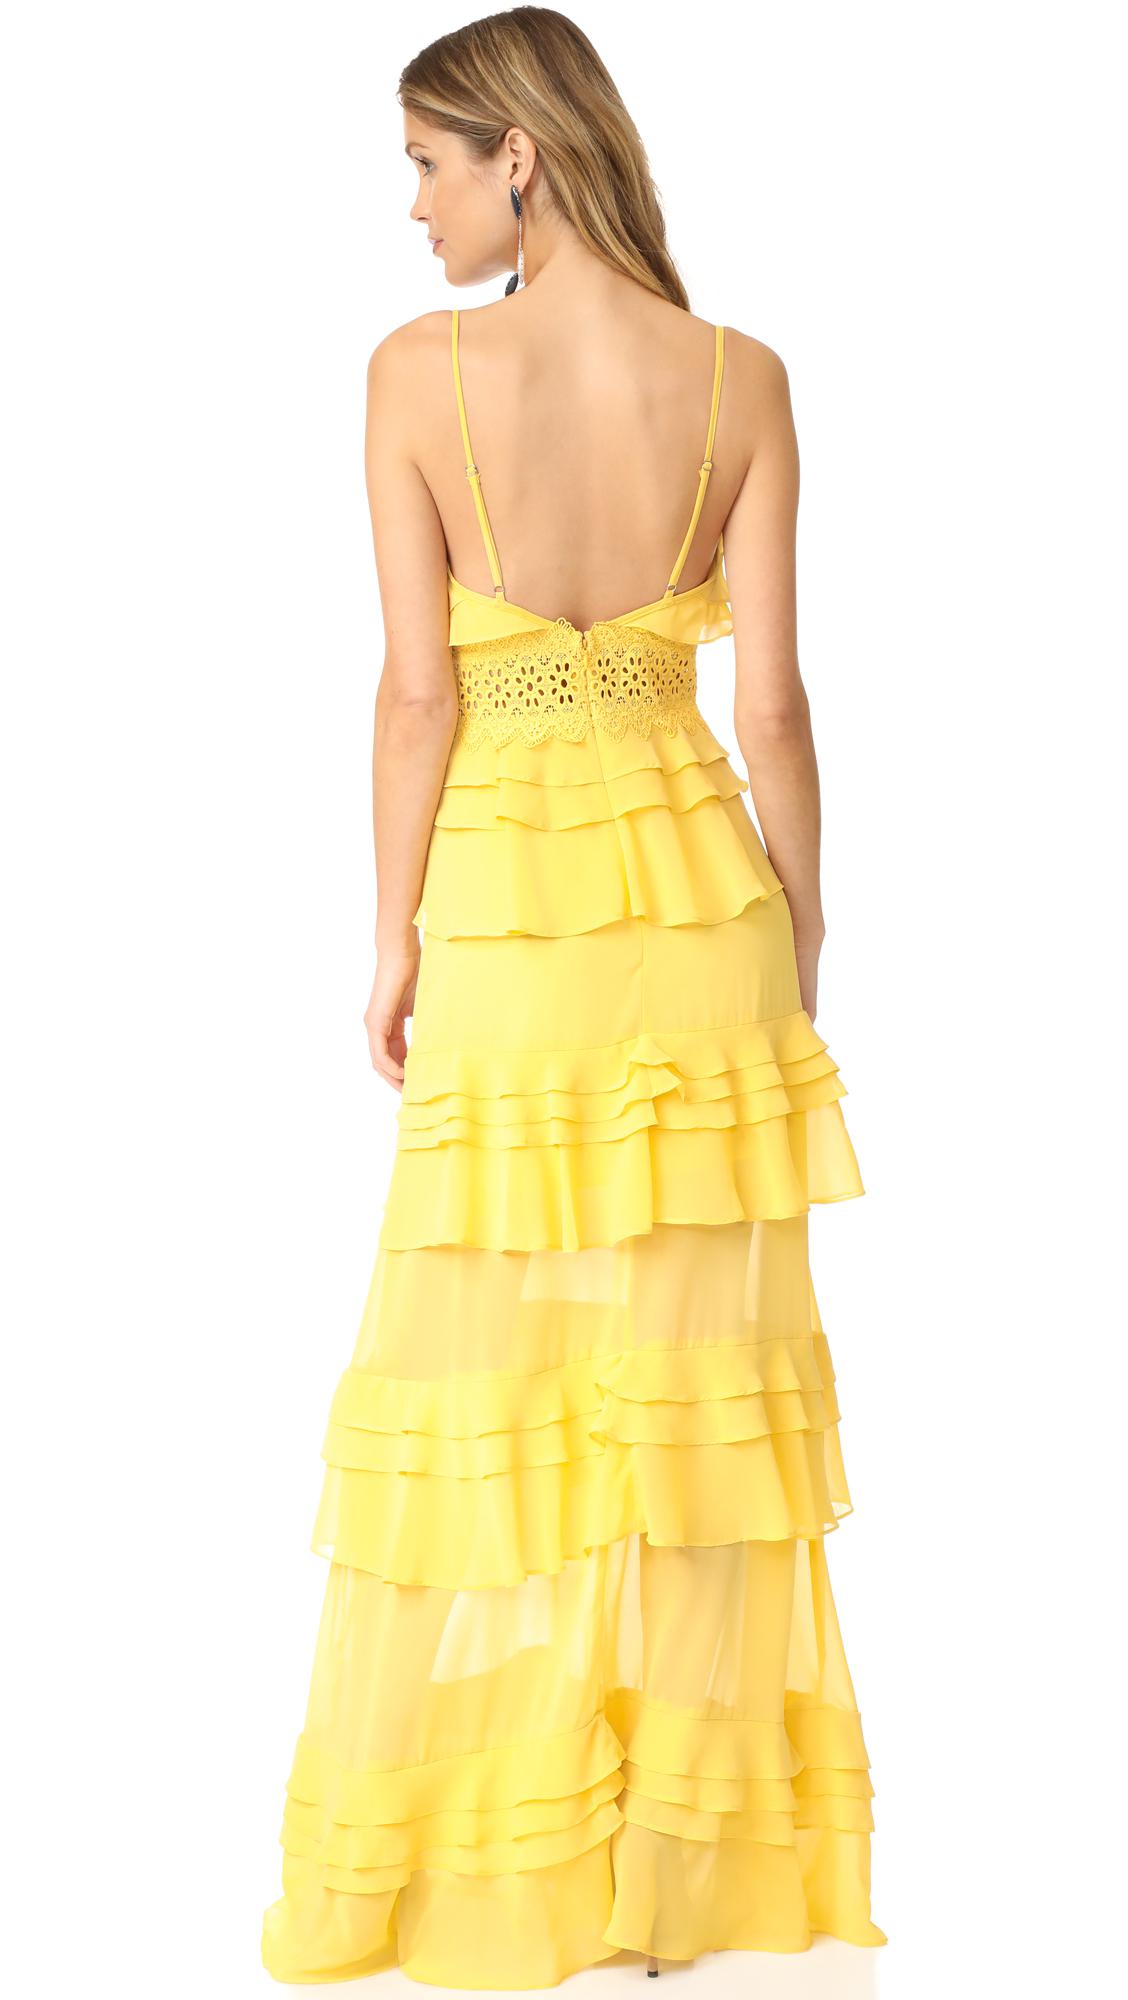 Glamorous Lace Tiered Dress in Yellow - Lyst